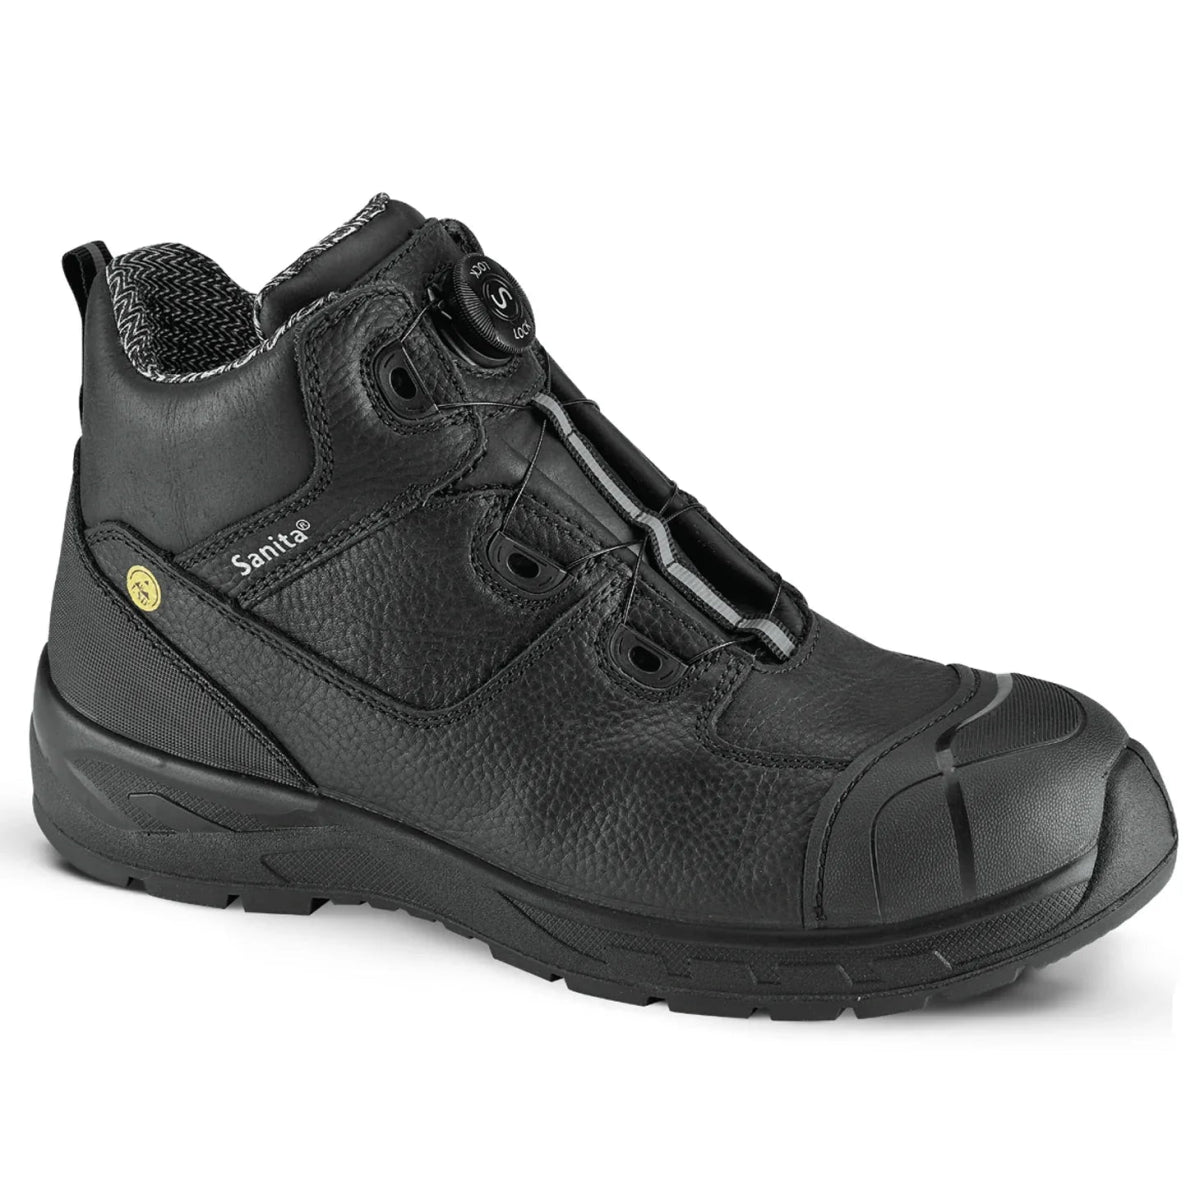 SANITA MALAKIT S3 WORK BOOT UNISEX IN BLACK - TLW Shoes